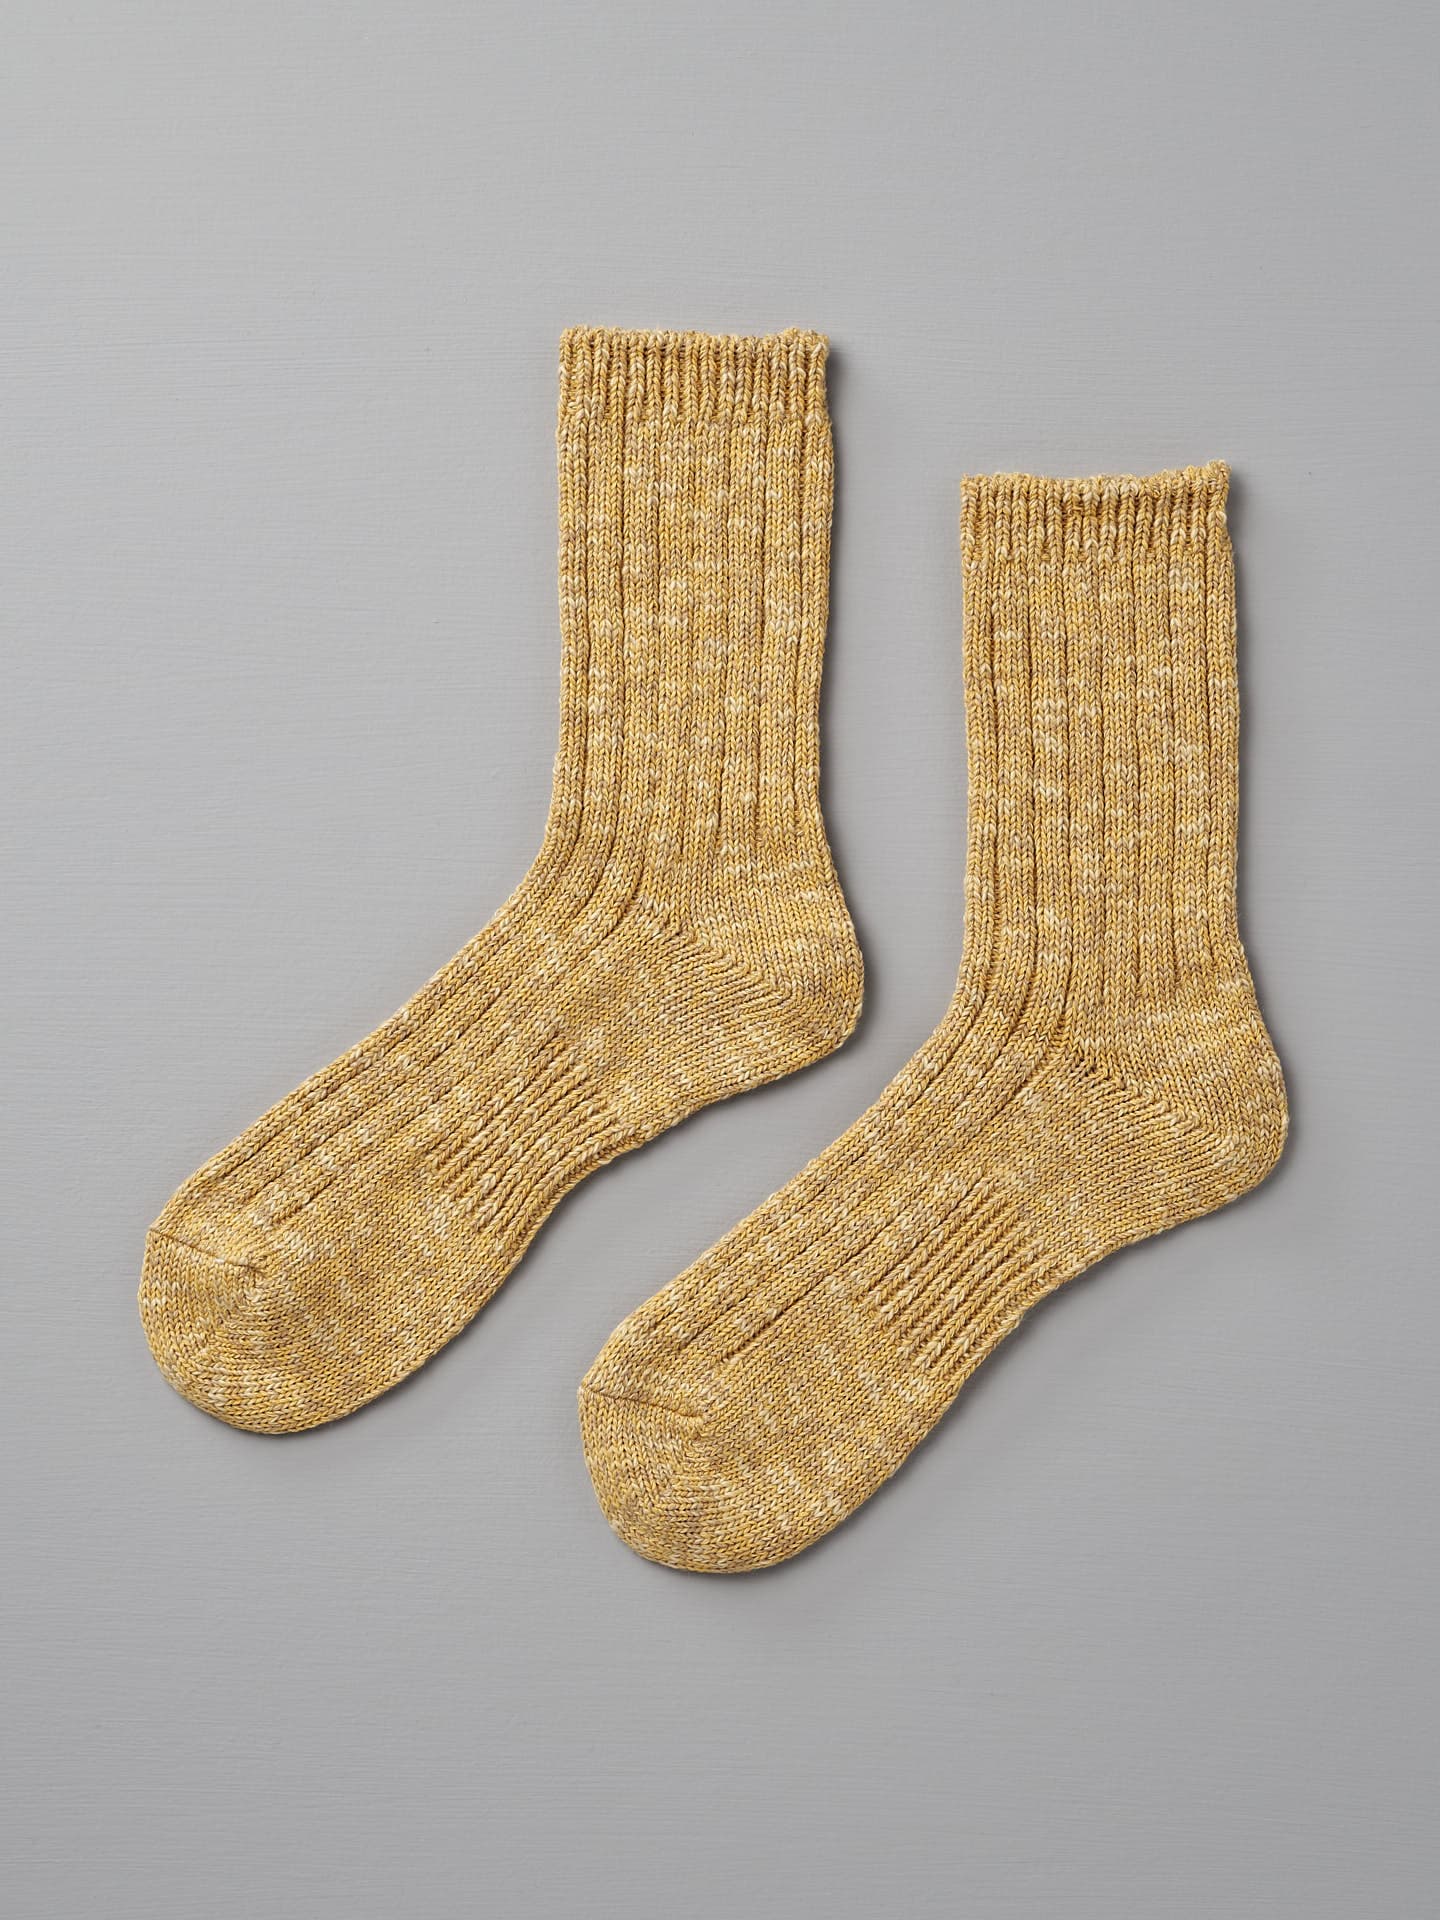 A pair of yellow knitted socks, fitting EUR 35—38, lies flat on a gray background. The Japanese Slub Rib Socks – Mustard by Mauna Kea have a ribbed texture extending from the cuffs to the toes.